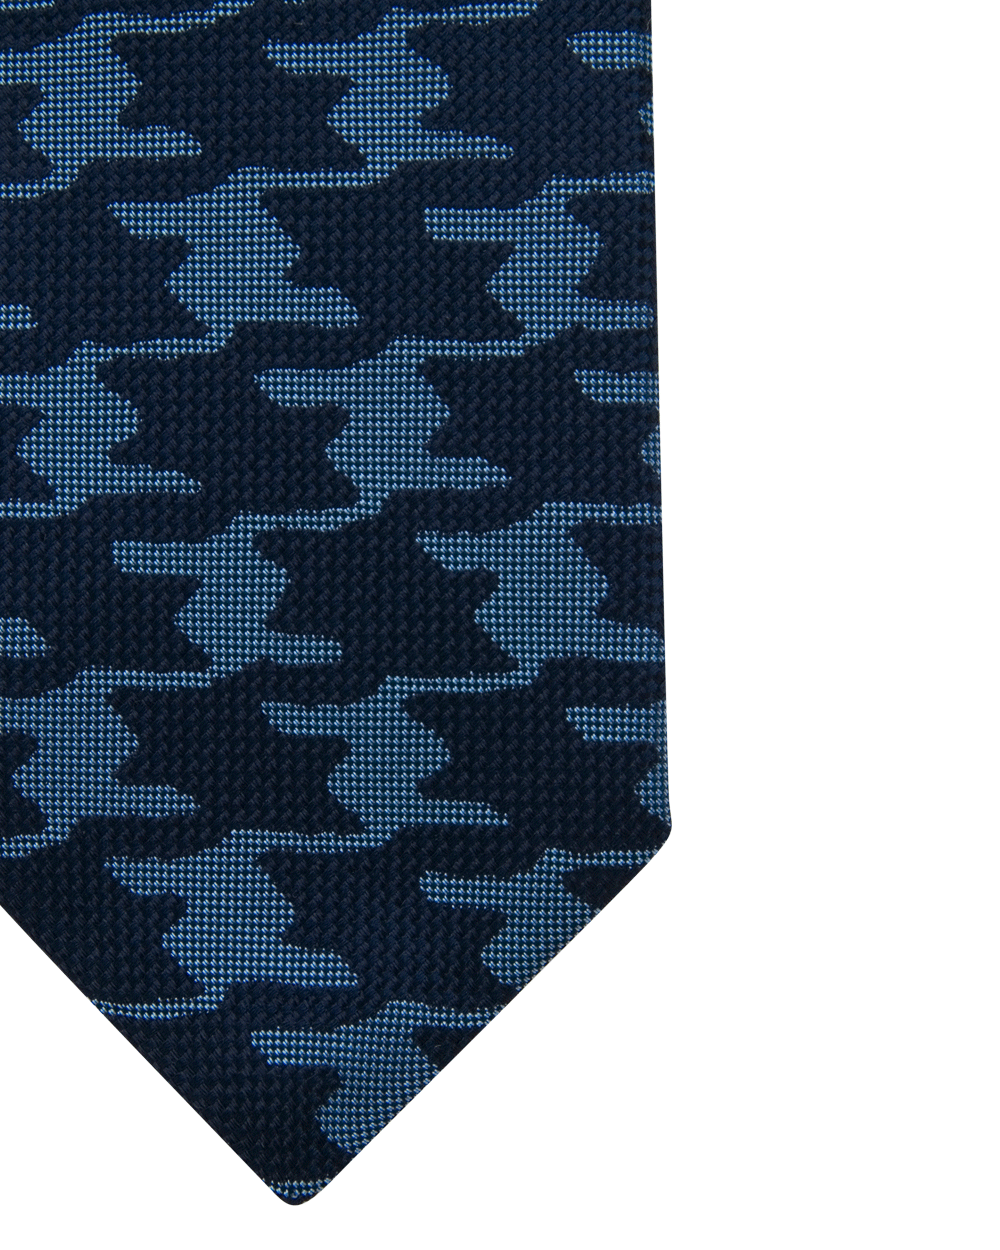 Blue and Royal Macro Houndstooth Tie